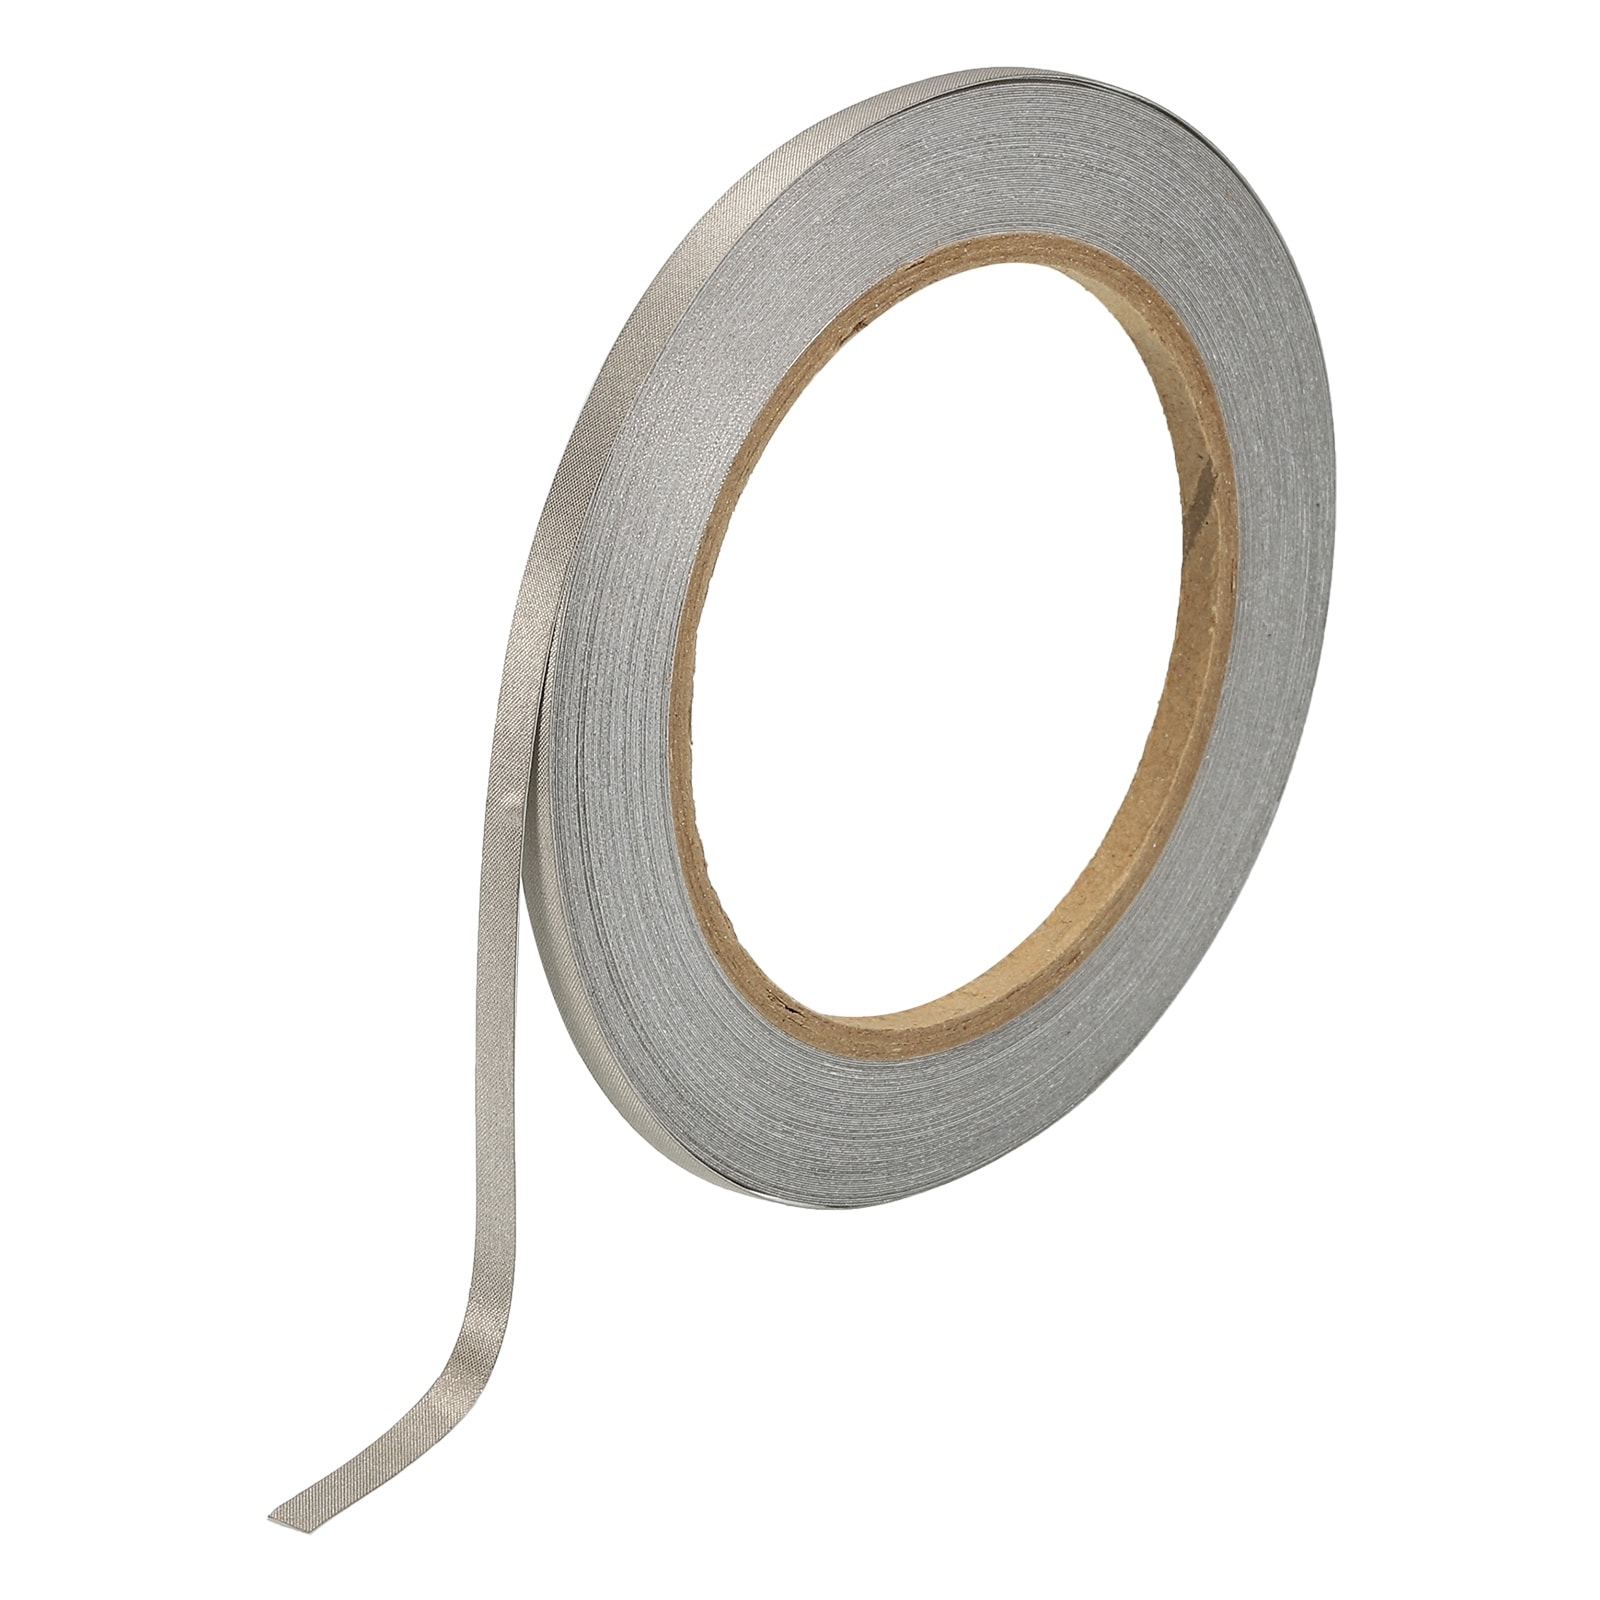 Faraday Tape 0.2x65.62 Feet Conductive Cloth Fabric Adhesive Tape - Silver  Gray - On Sale - Bed Bath & Beyond - 37829753